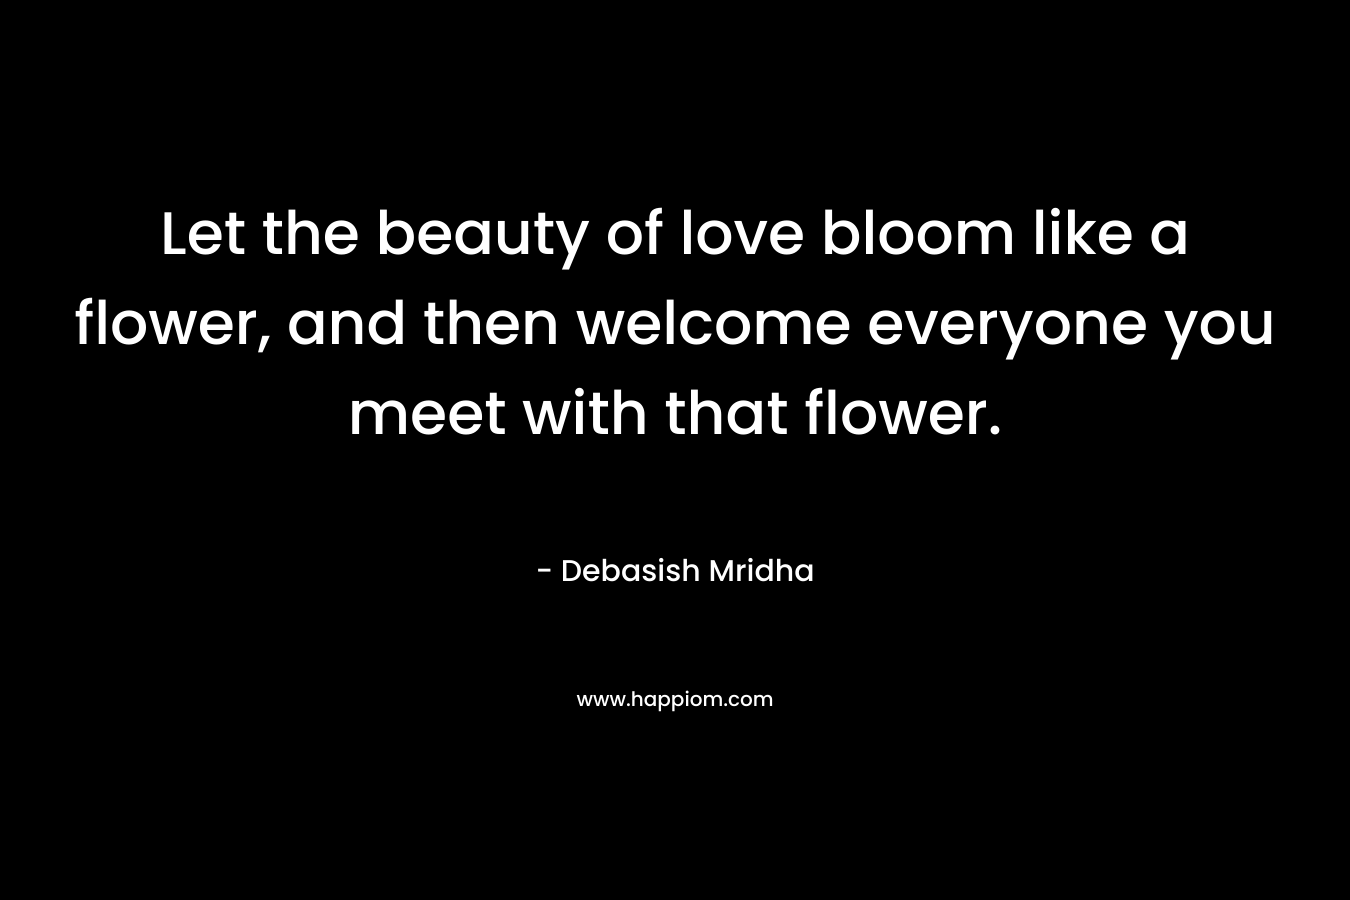 Let the beauty of love bloom like a flower, and then welcome everyone you meet with that flower.